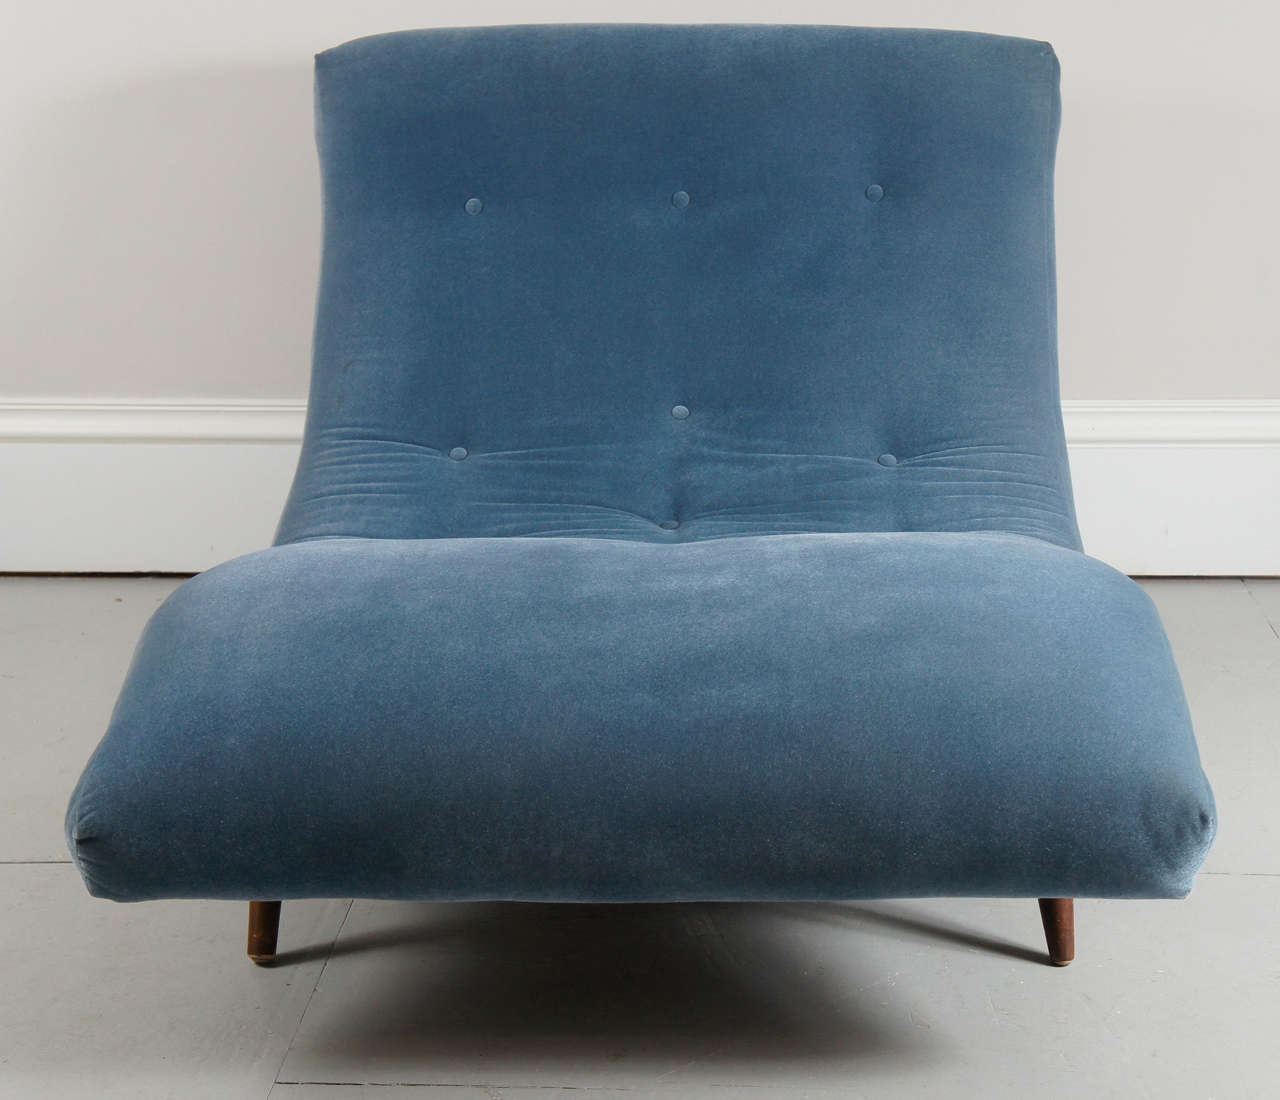 Classic Adrian Pearsall chaise lounge.